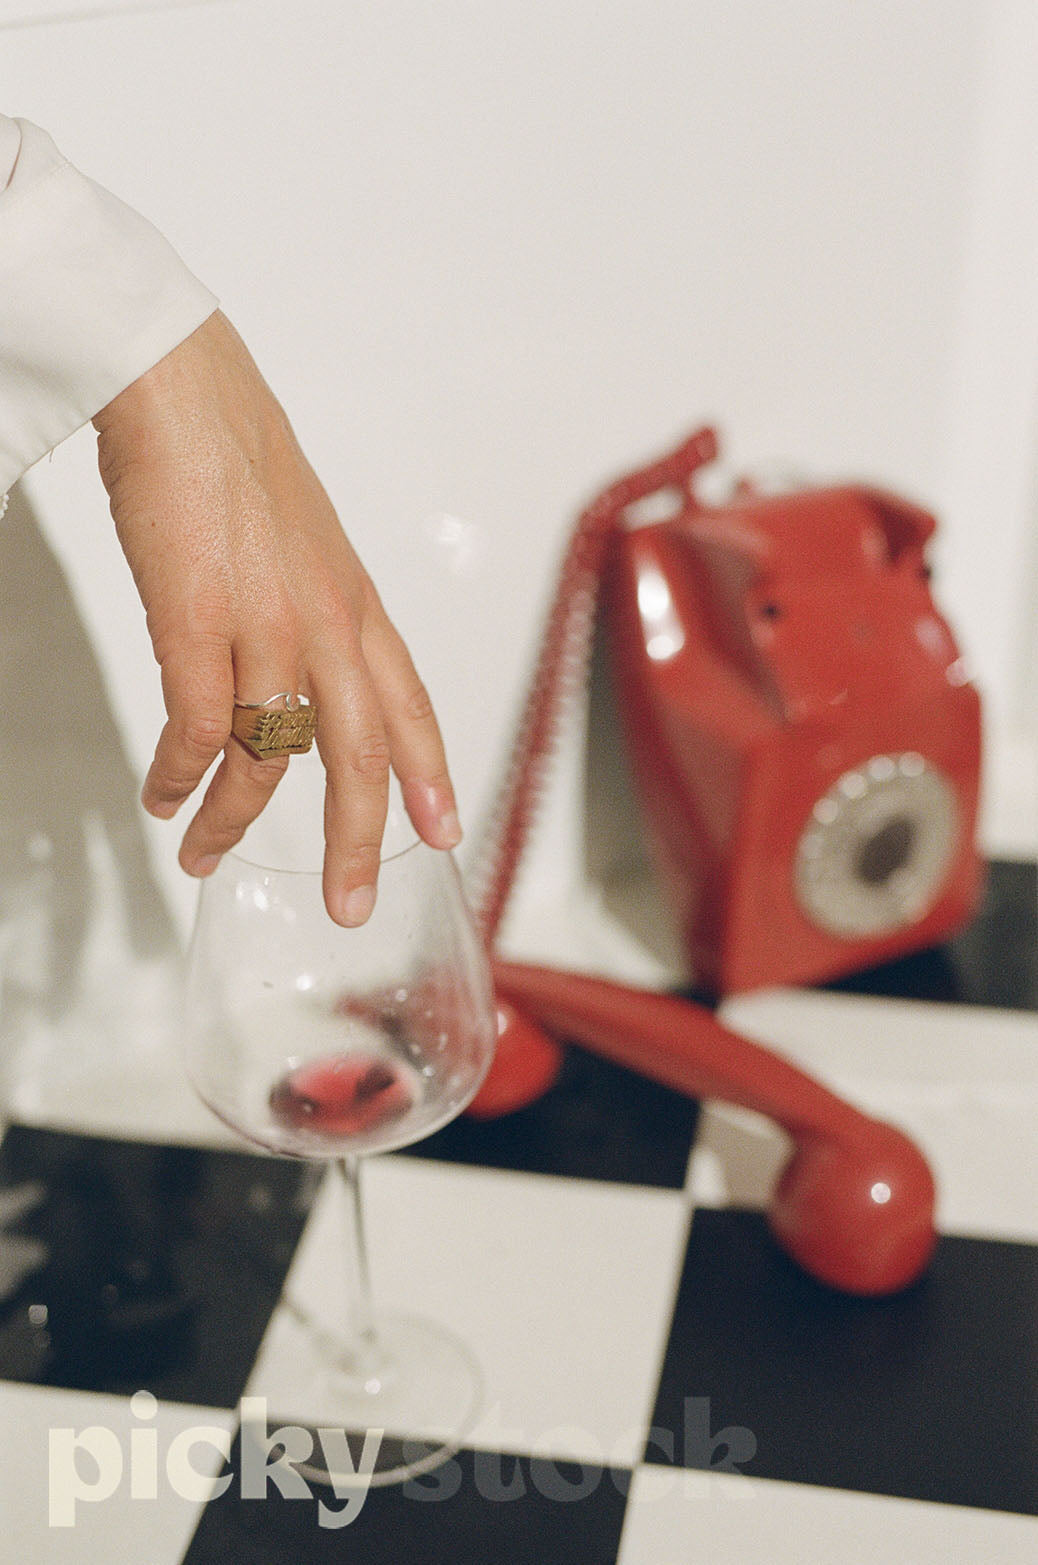 Female hand picking up red wine glass from rim. With red vintage phone in background. Items sitting on a black and white checkerboard floor